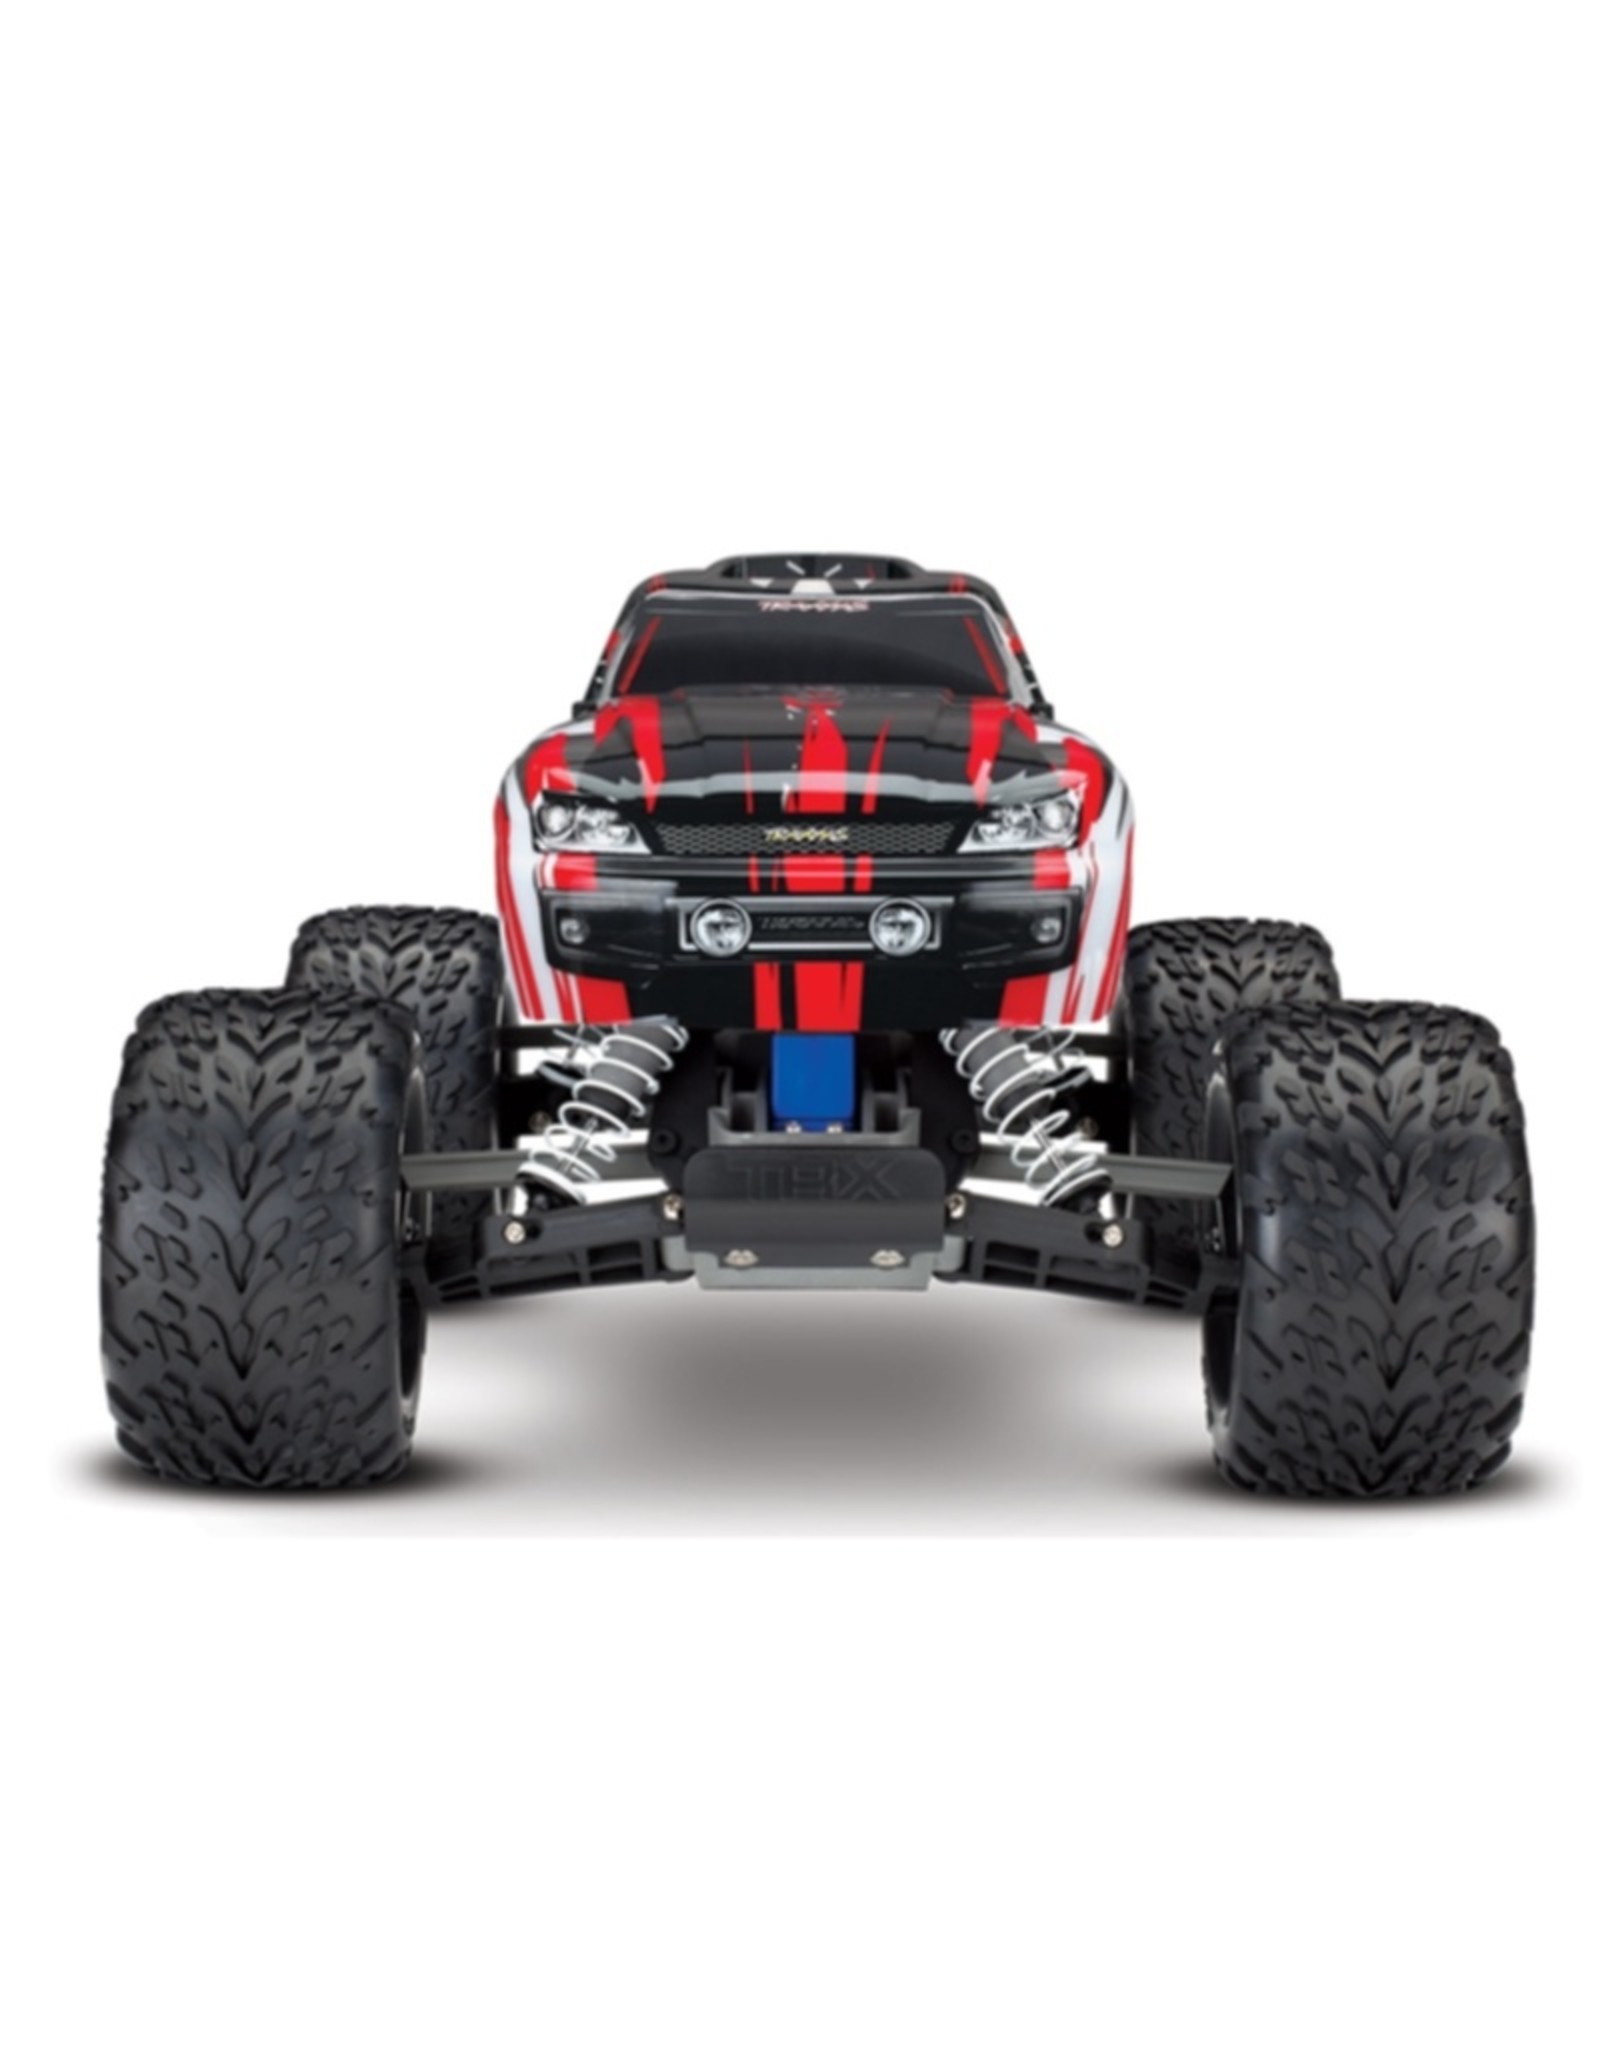 Traxxas TRA36054-4 RED Stampede : 1/10 Scale Monster Truck (Battery & DC Charger NOT Included)